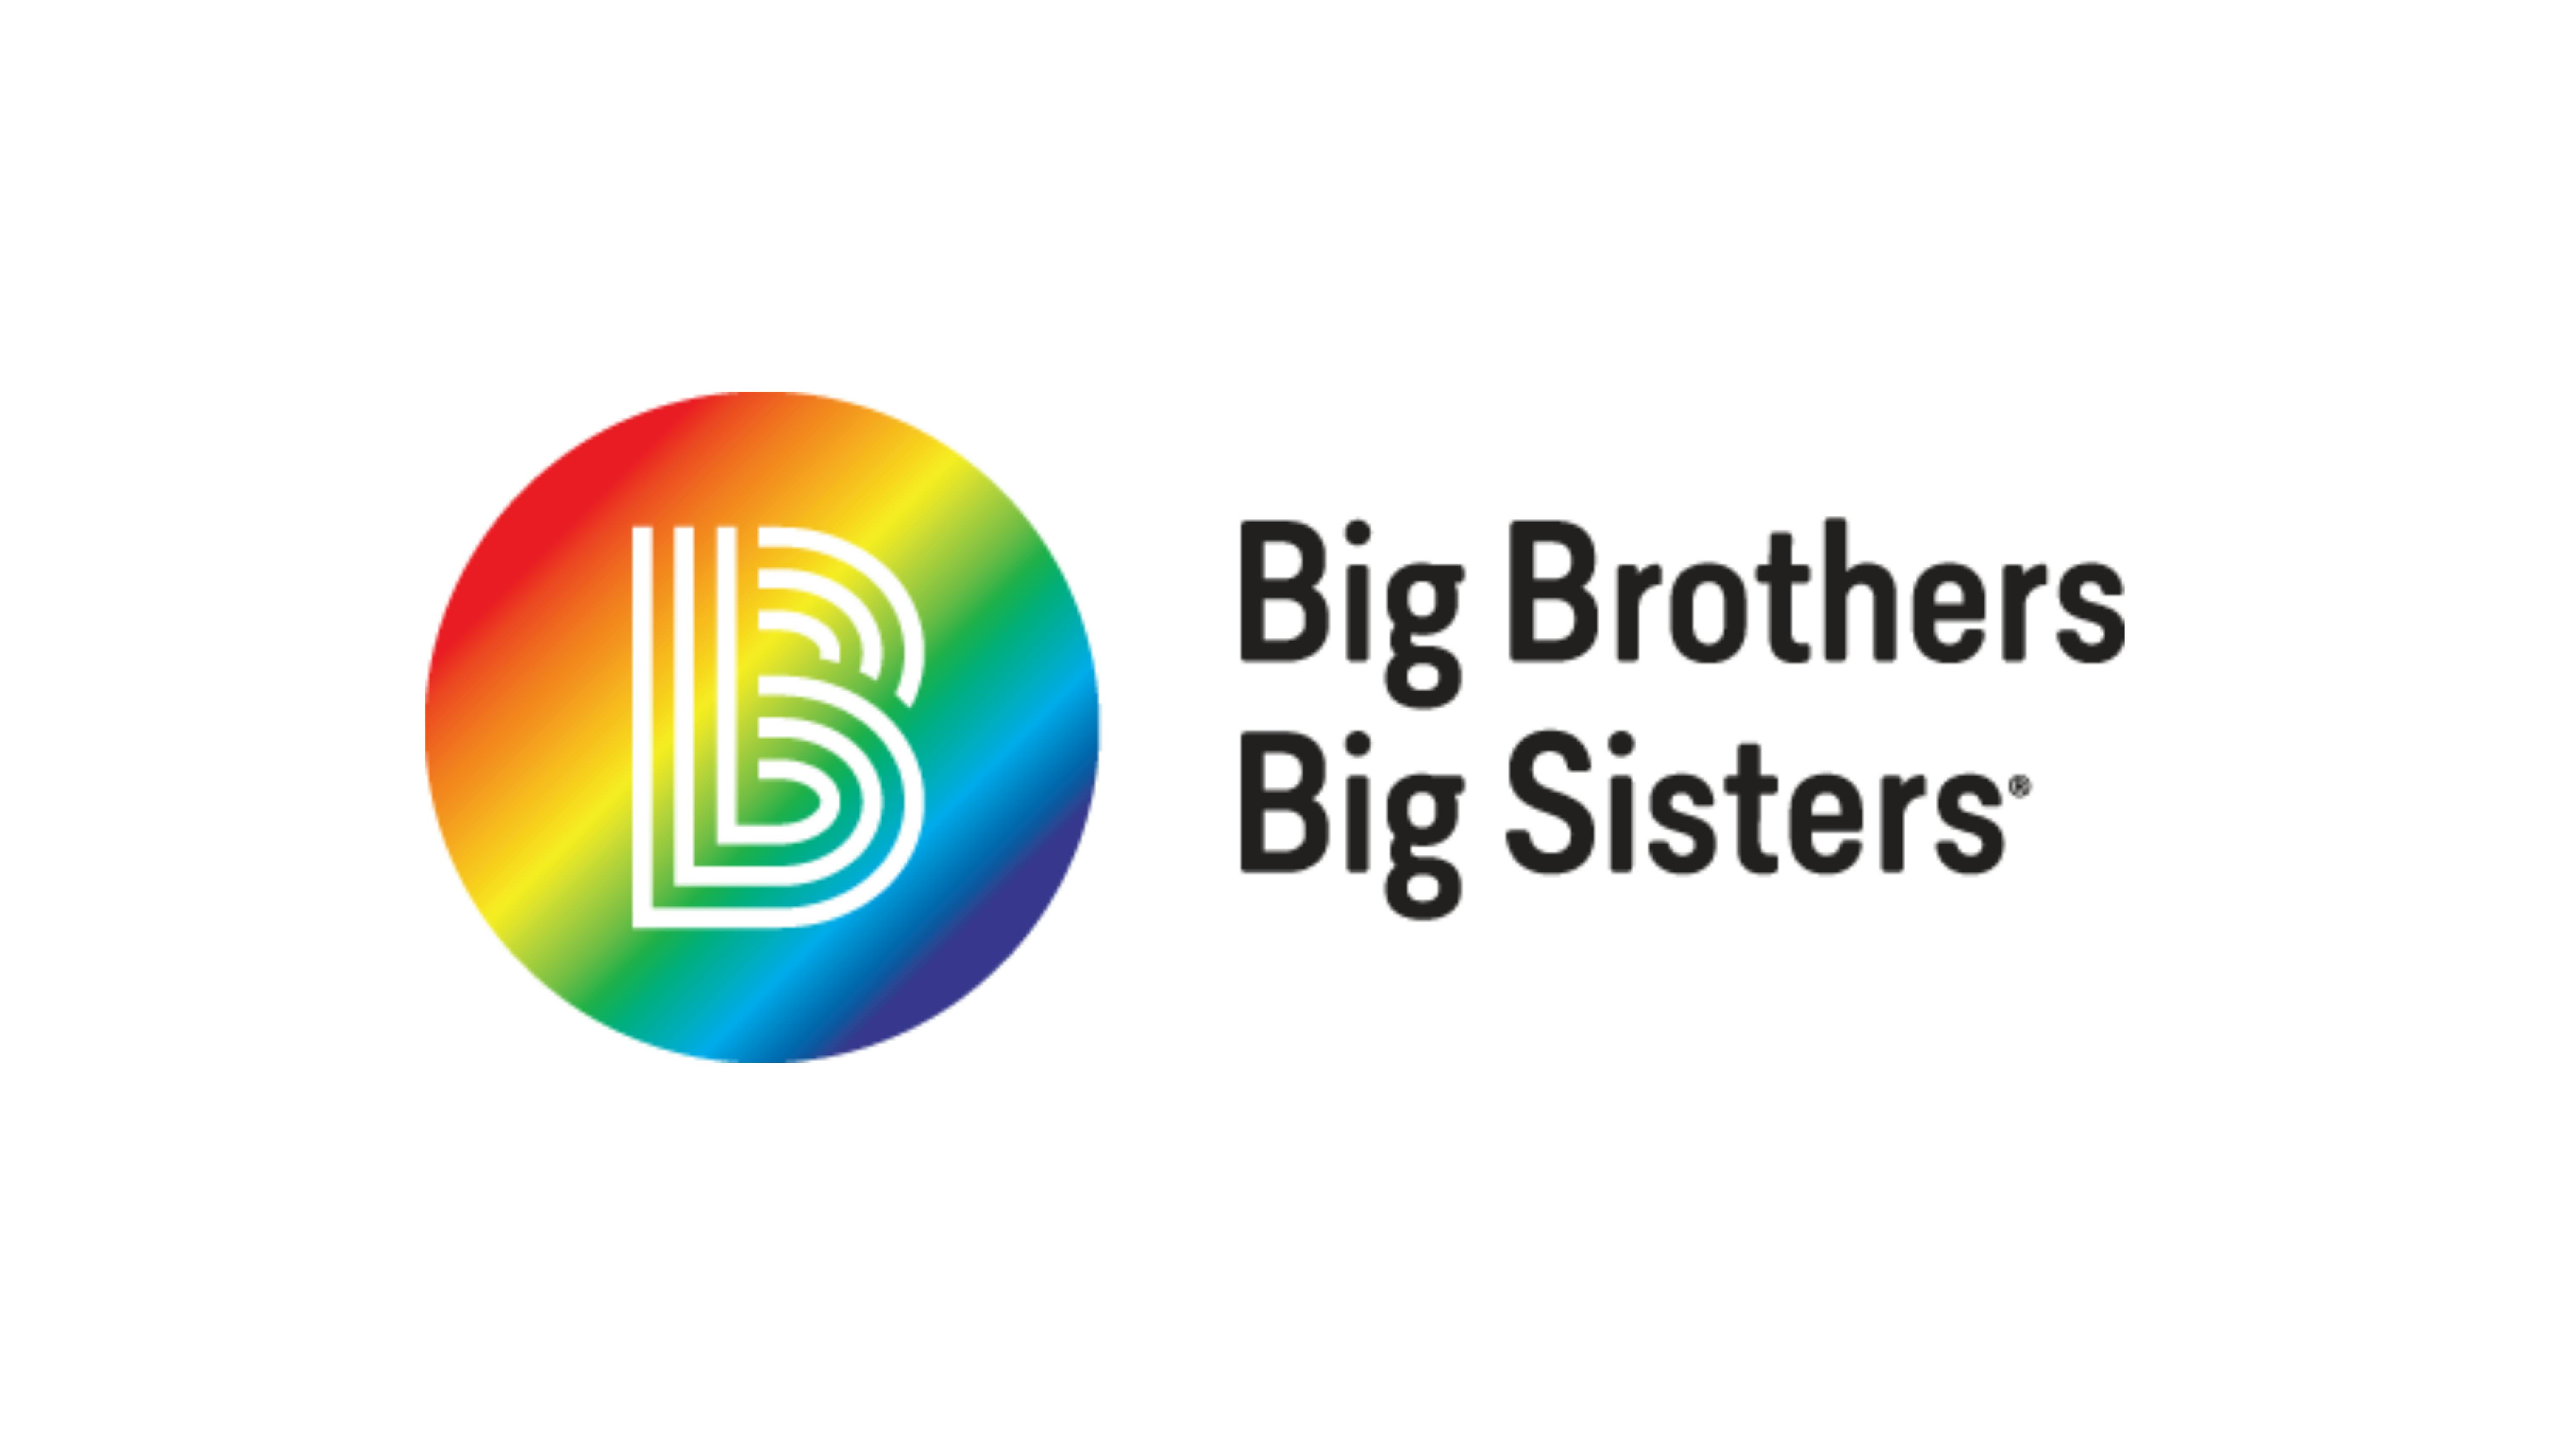 Big Brothers Big Sisters proudly serves the LGBTQ community cover image